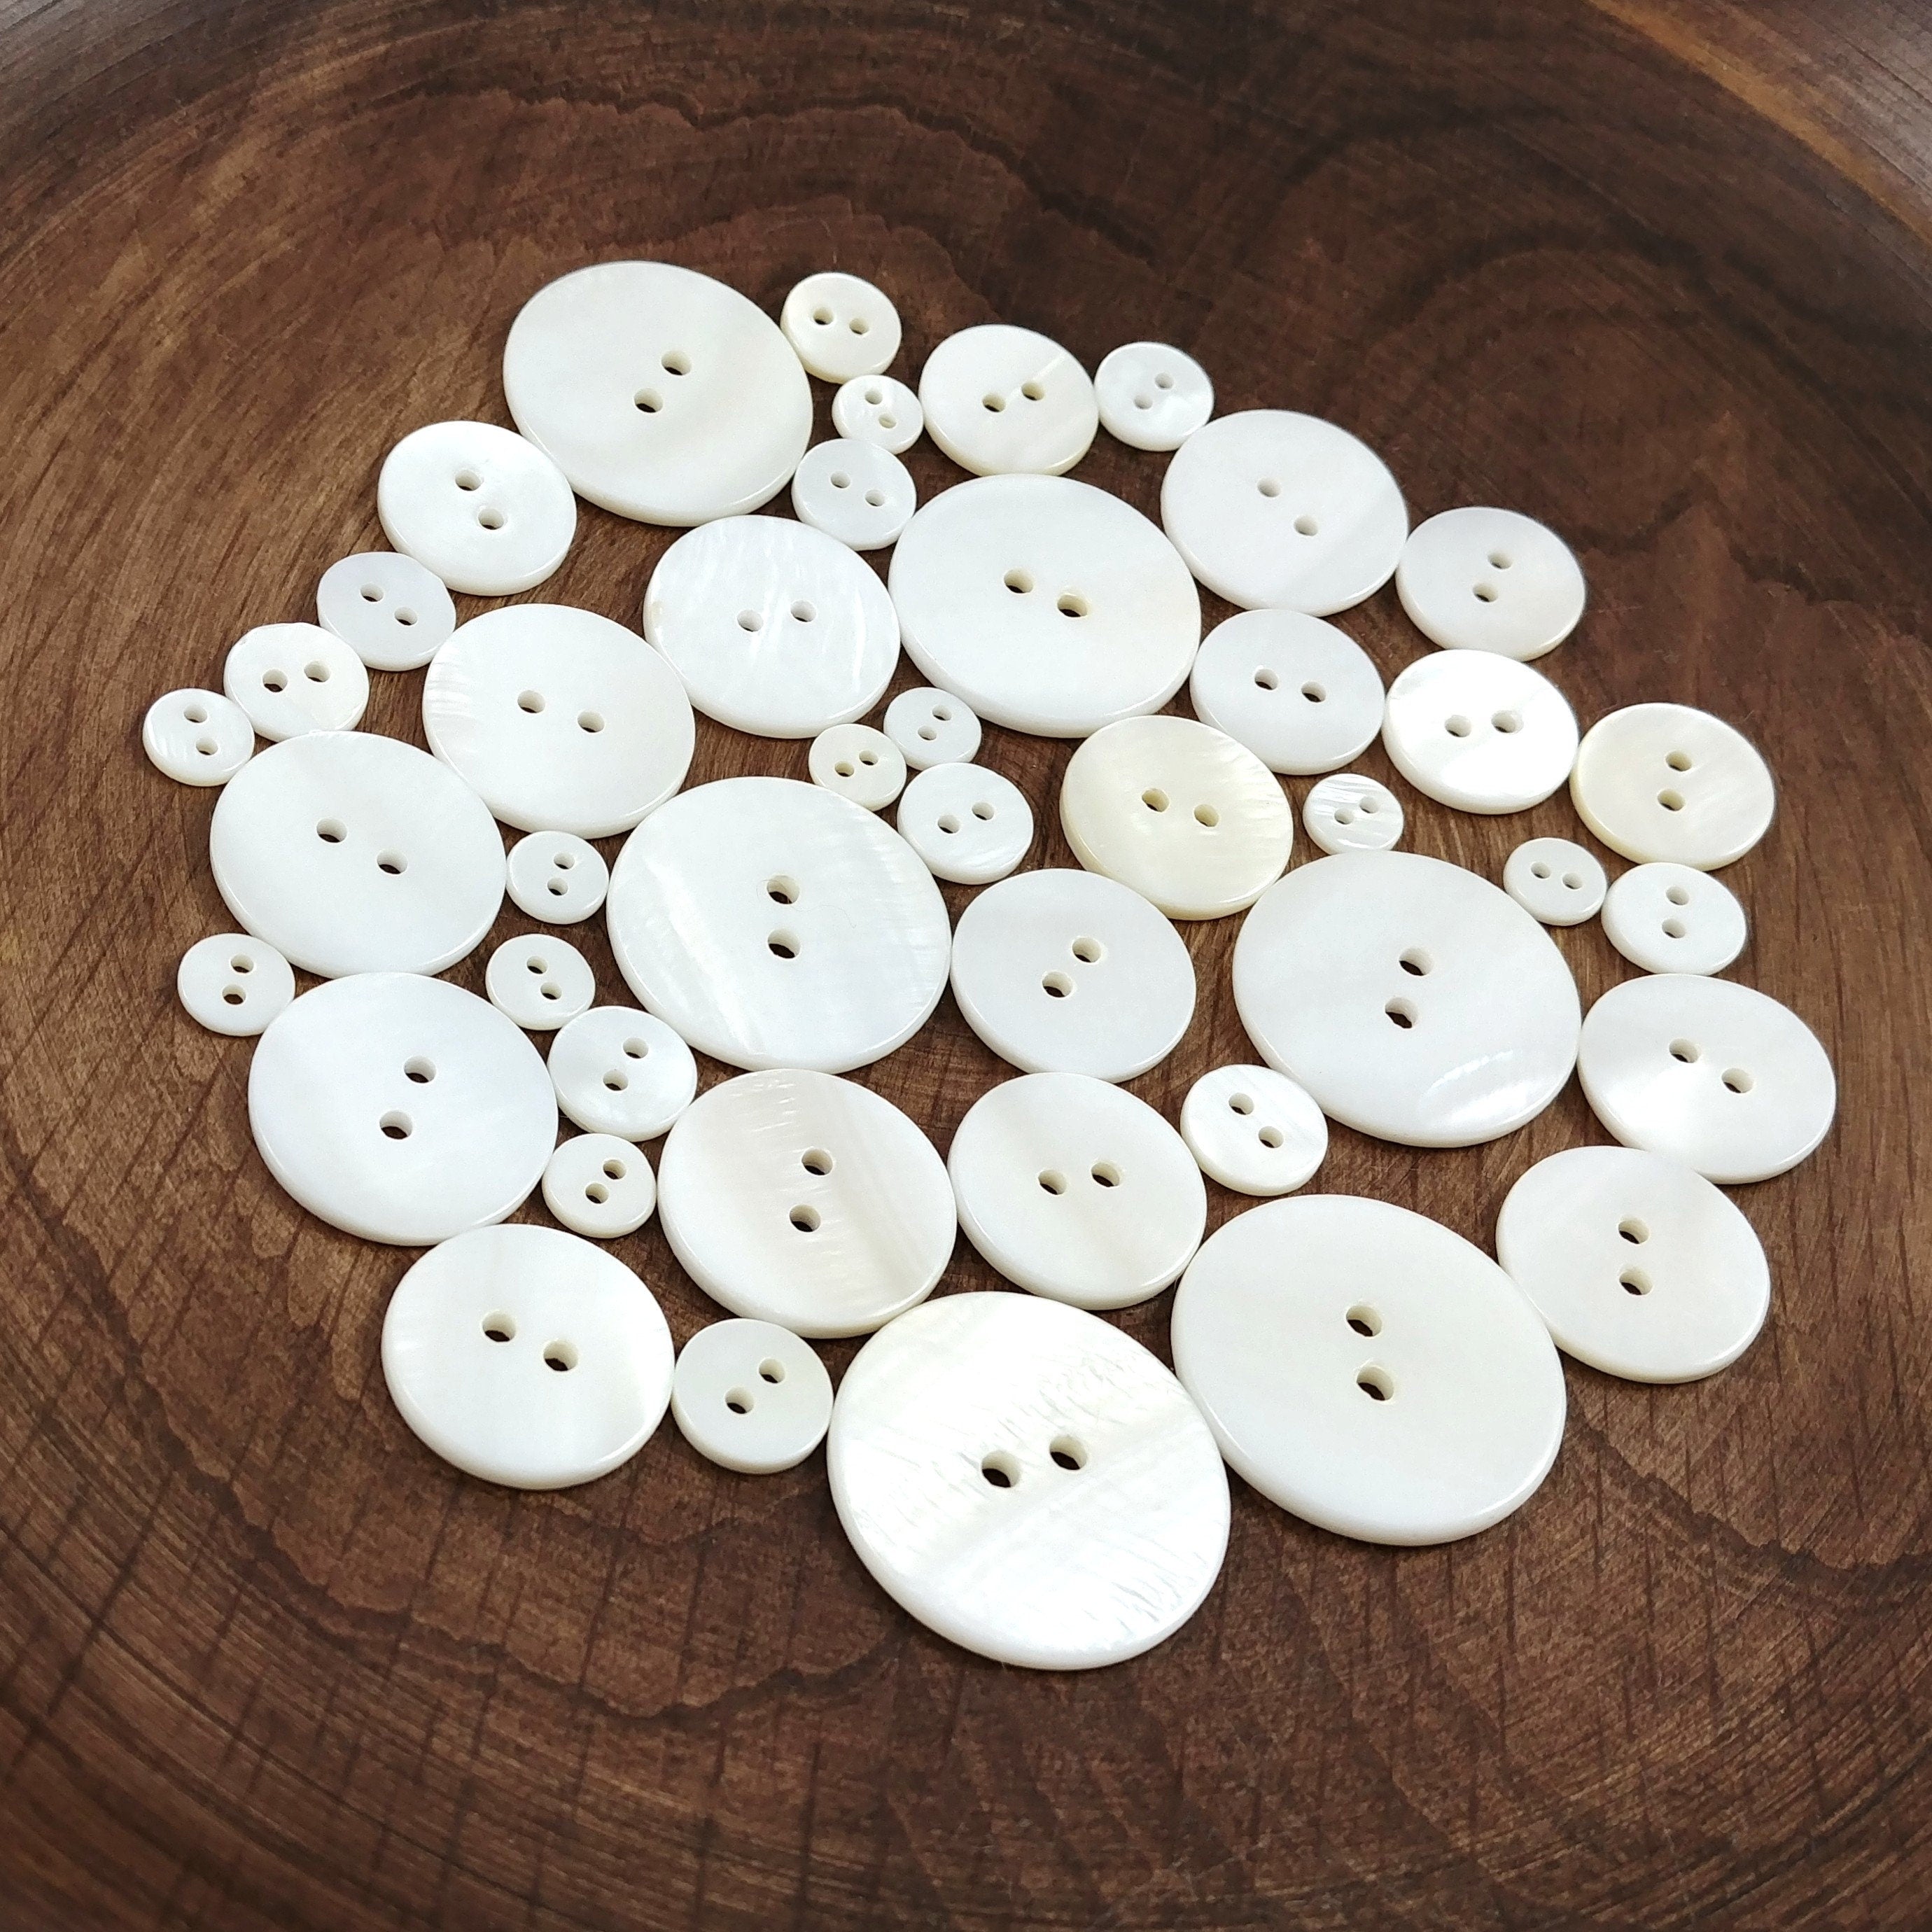 Extra Large Mother Of Pearl Button, 1 inch